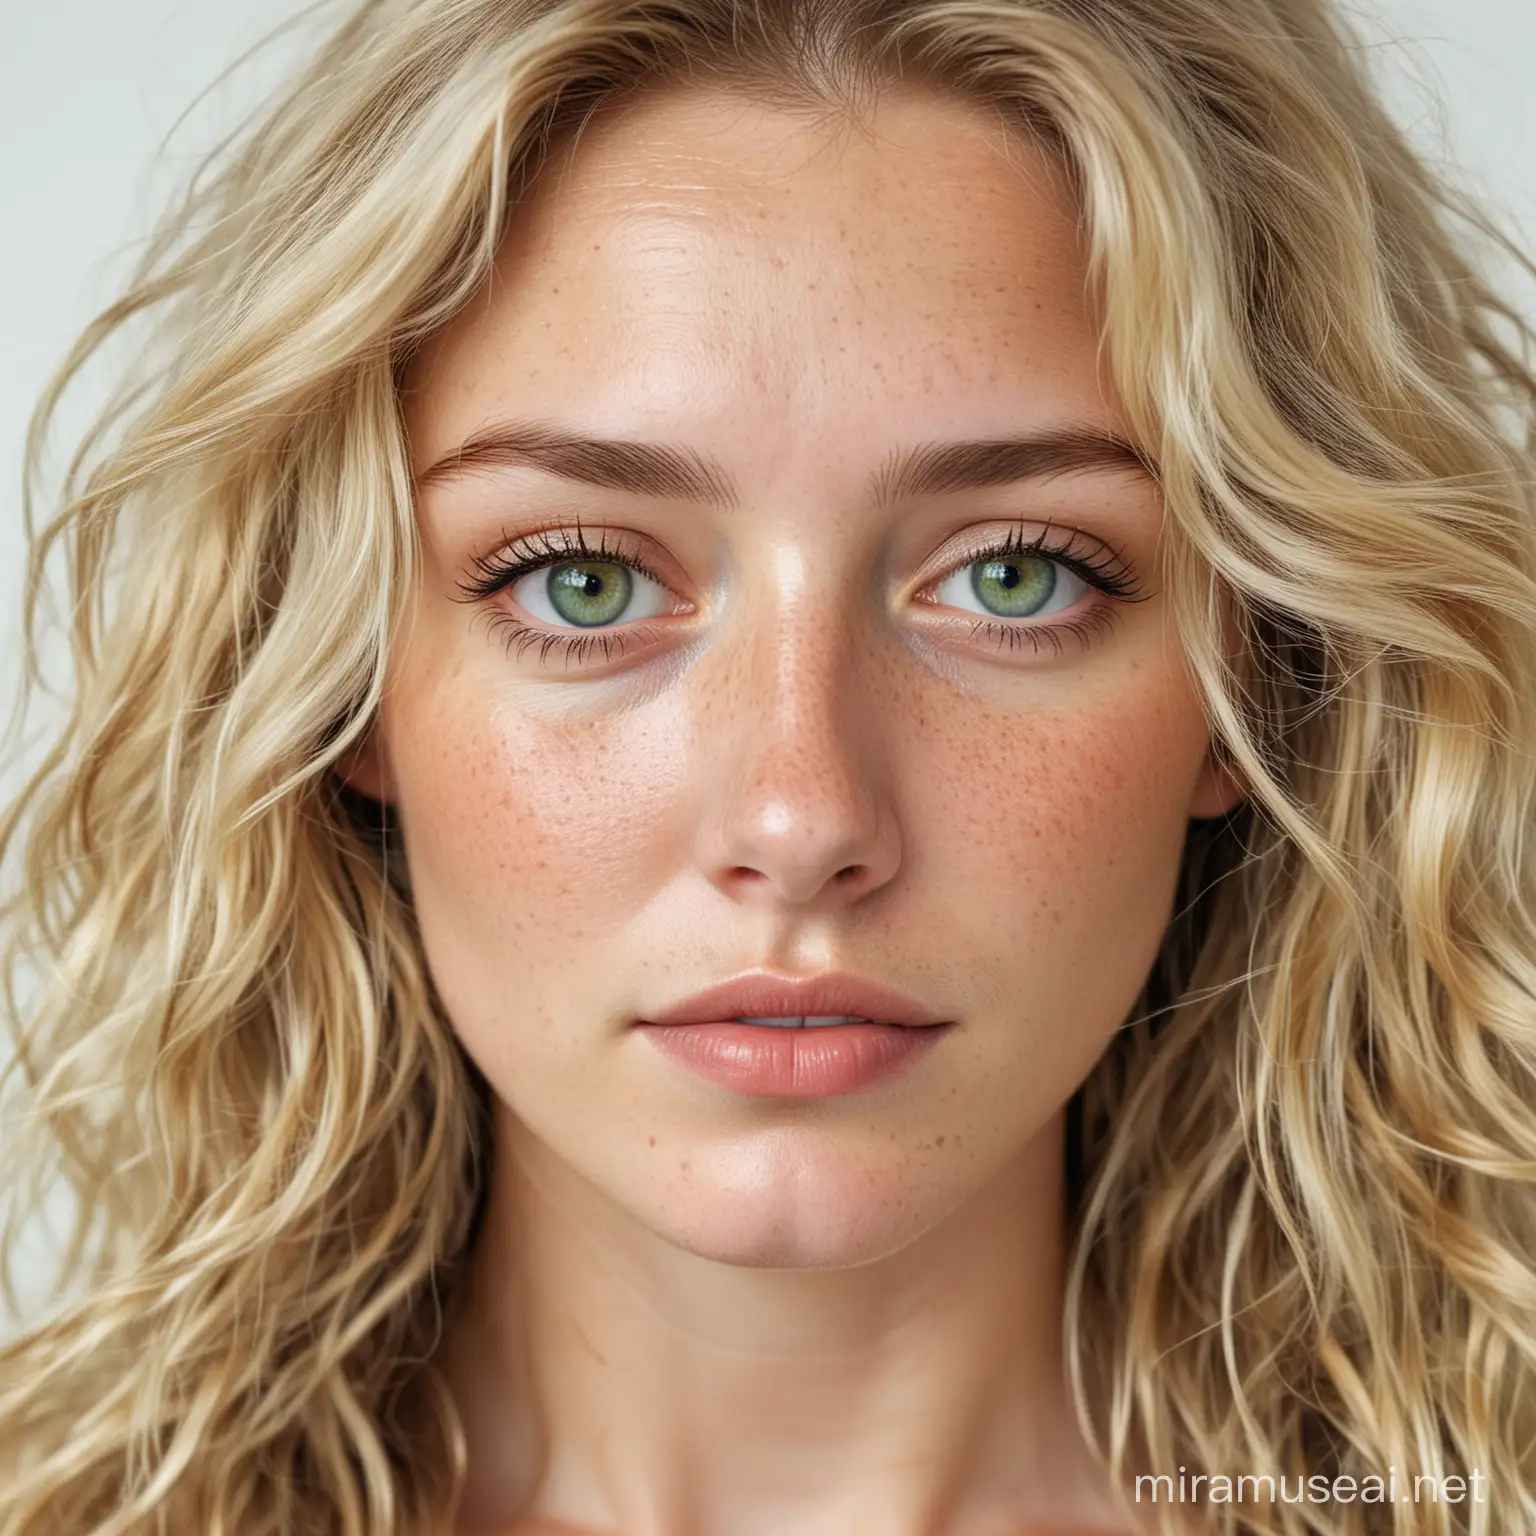 Graceful Blonde Woman with Wavy Hair and Green Eyes